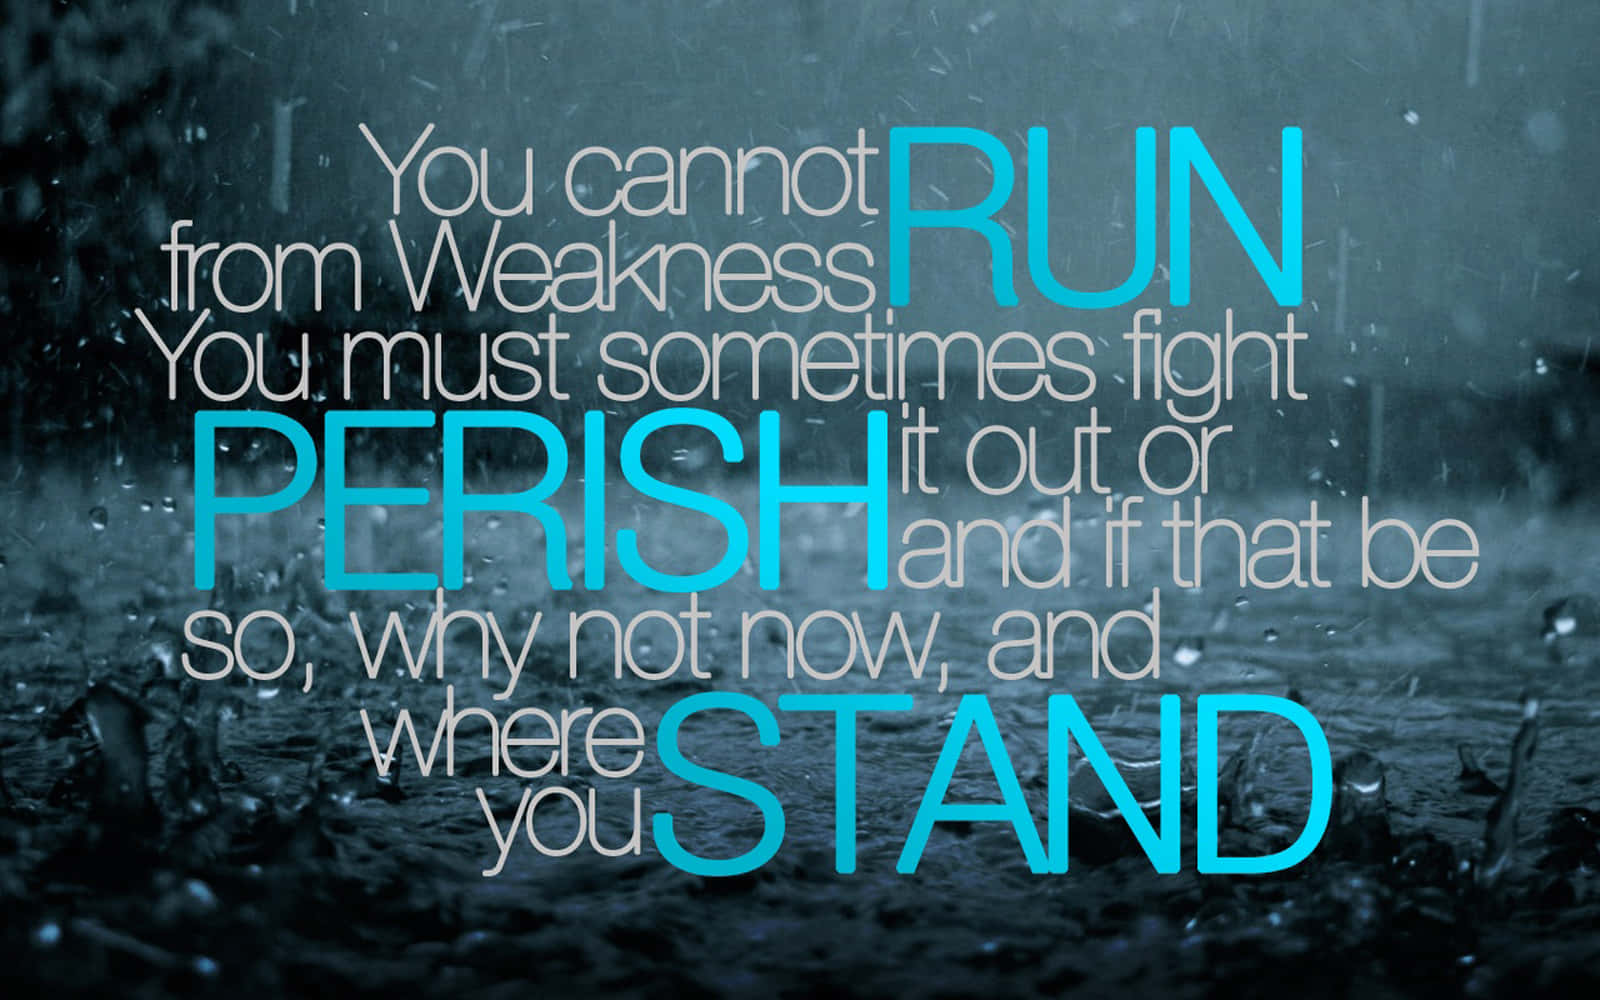 A Quote That Says You Cannot Run From Weakness